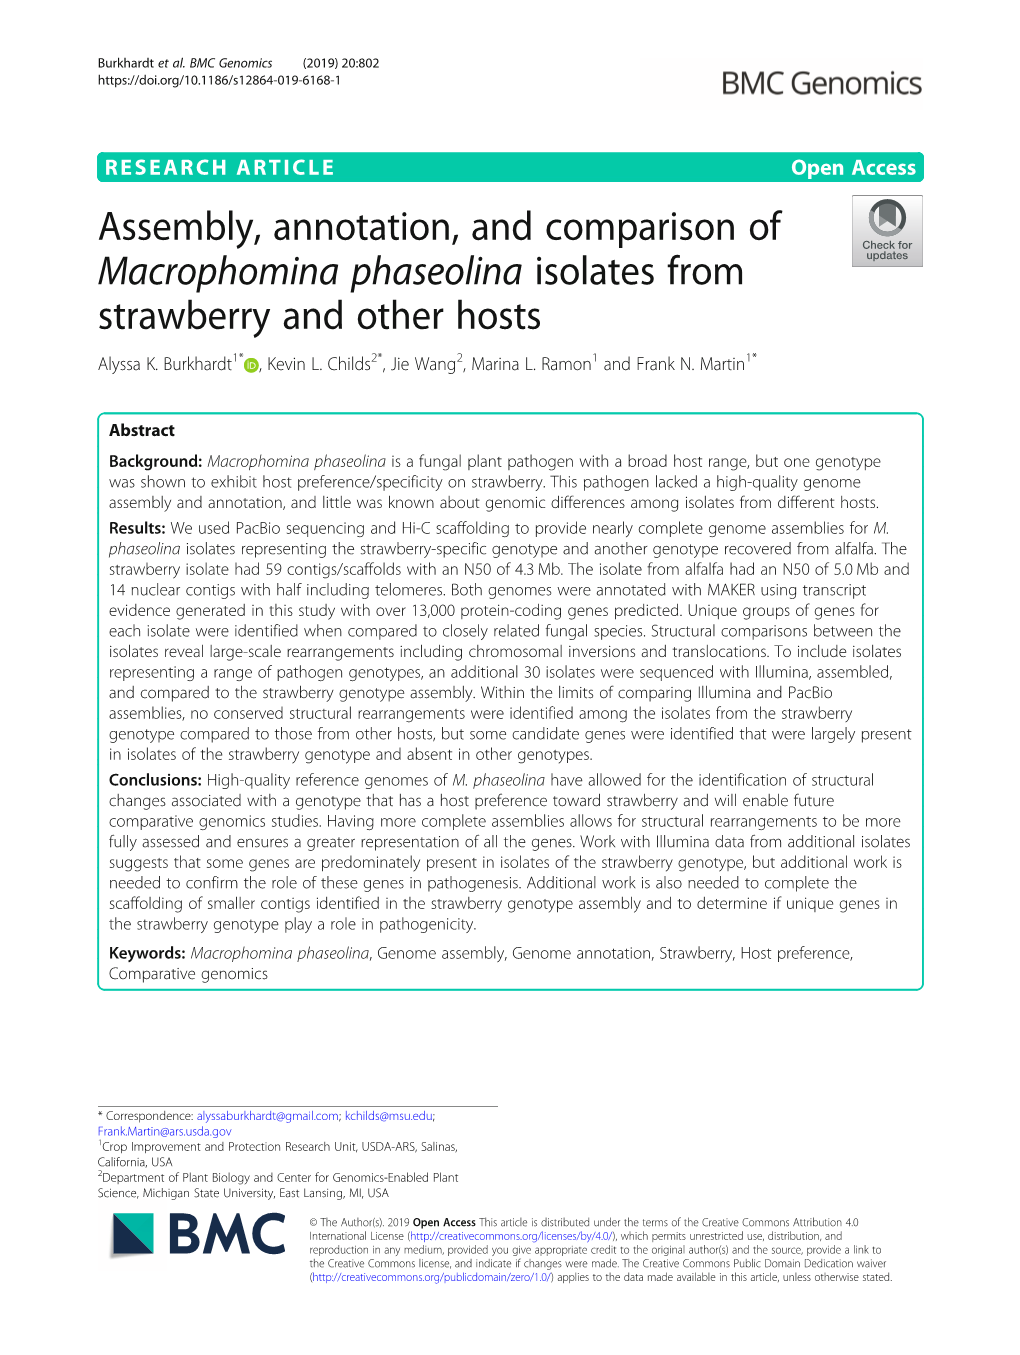 Assembly, Annotation, and Comparison of Macrophomina Phaseolina Isolates from Strawberry and Other Hosts Alyssa K